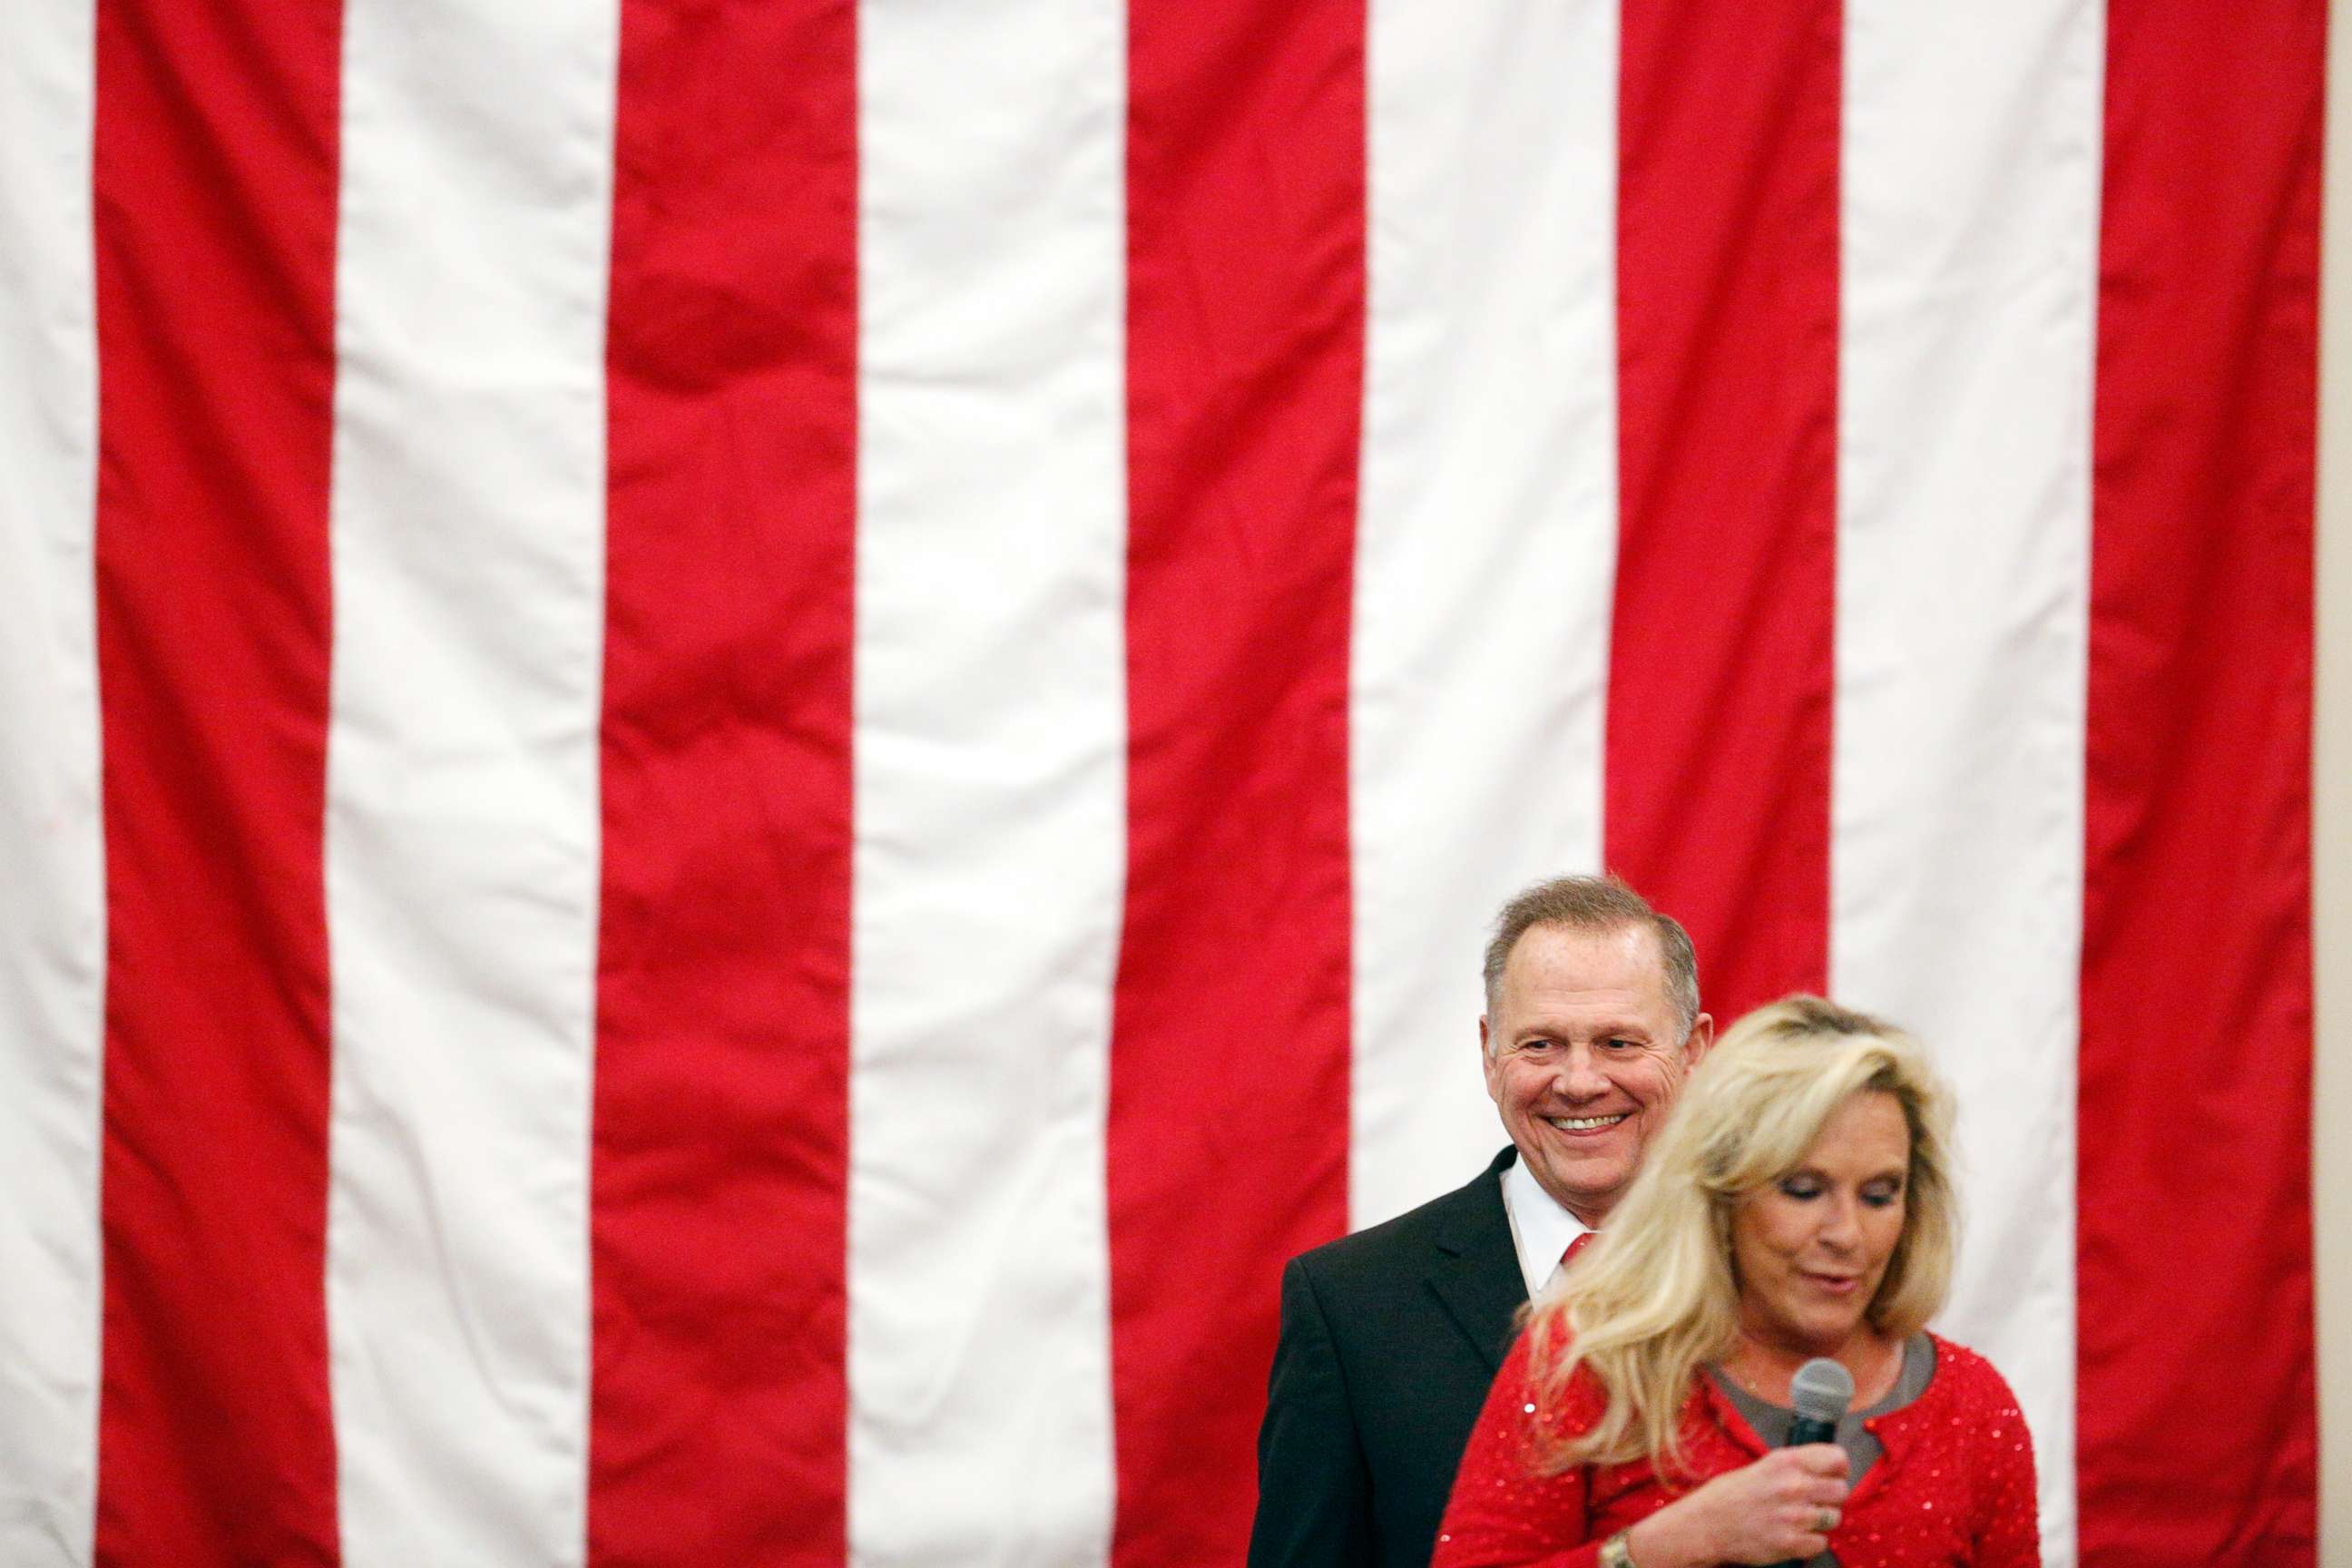 PHOTO: Roy Moore, Republican candidate for Senate from Alabama, reacts as his wife Kayla Moore speaks during a campaign rally in Midland City, Alabama, Dec. 11, 2017.